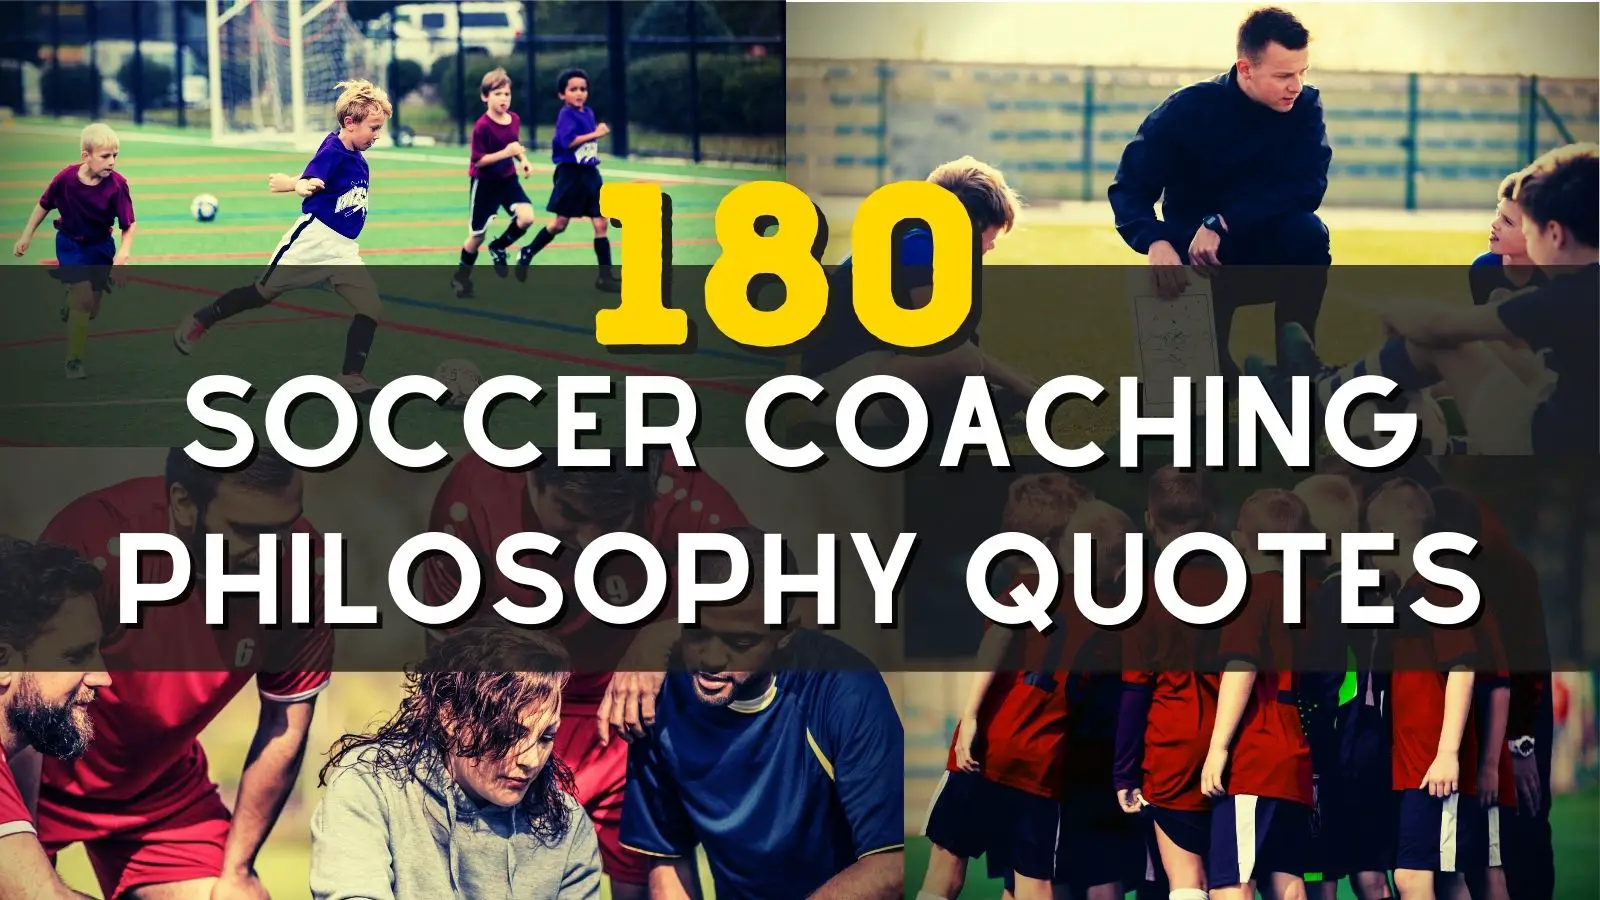 Soccer Coaching Quotes: 180 Inspirational Soccer Coaching Philosophies